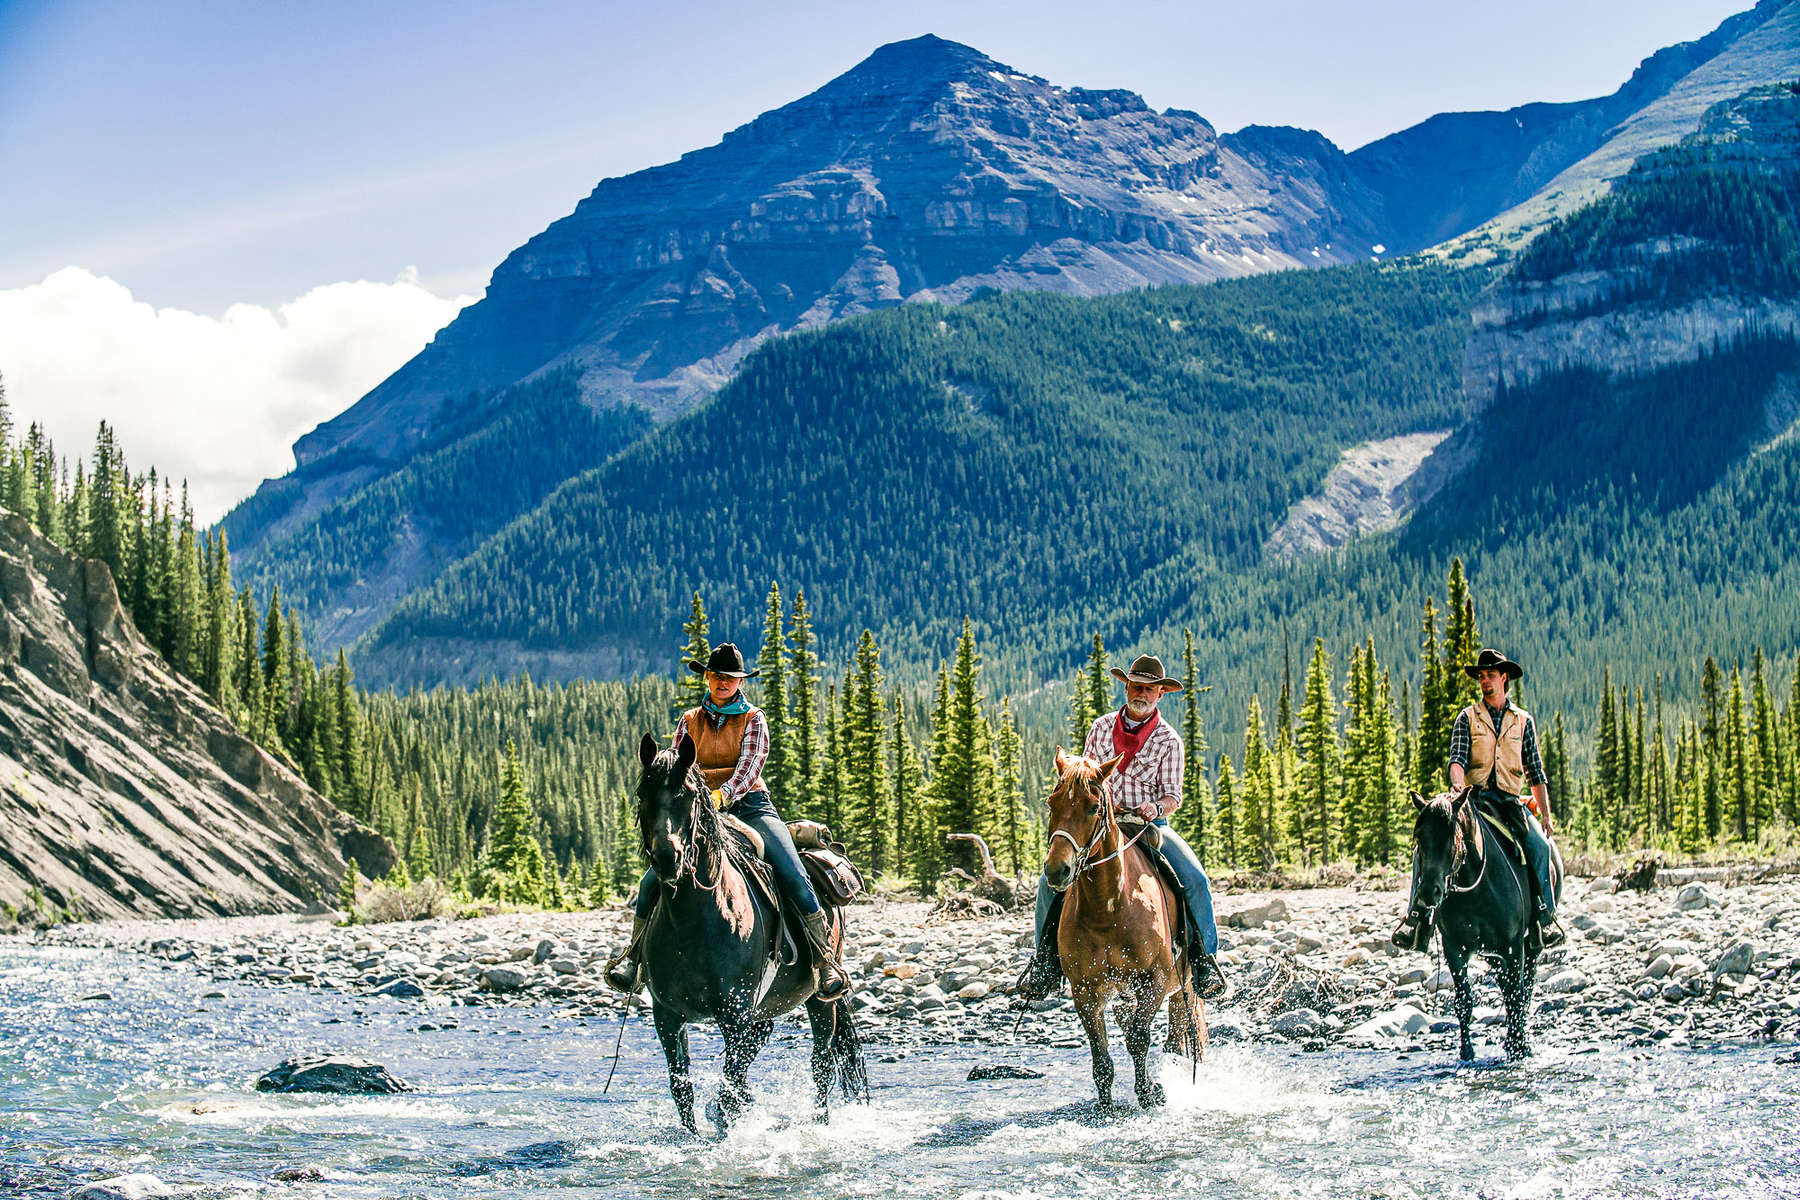 Riders in the river with a spectacular mountainous backdrop